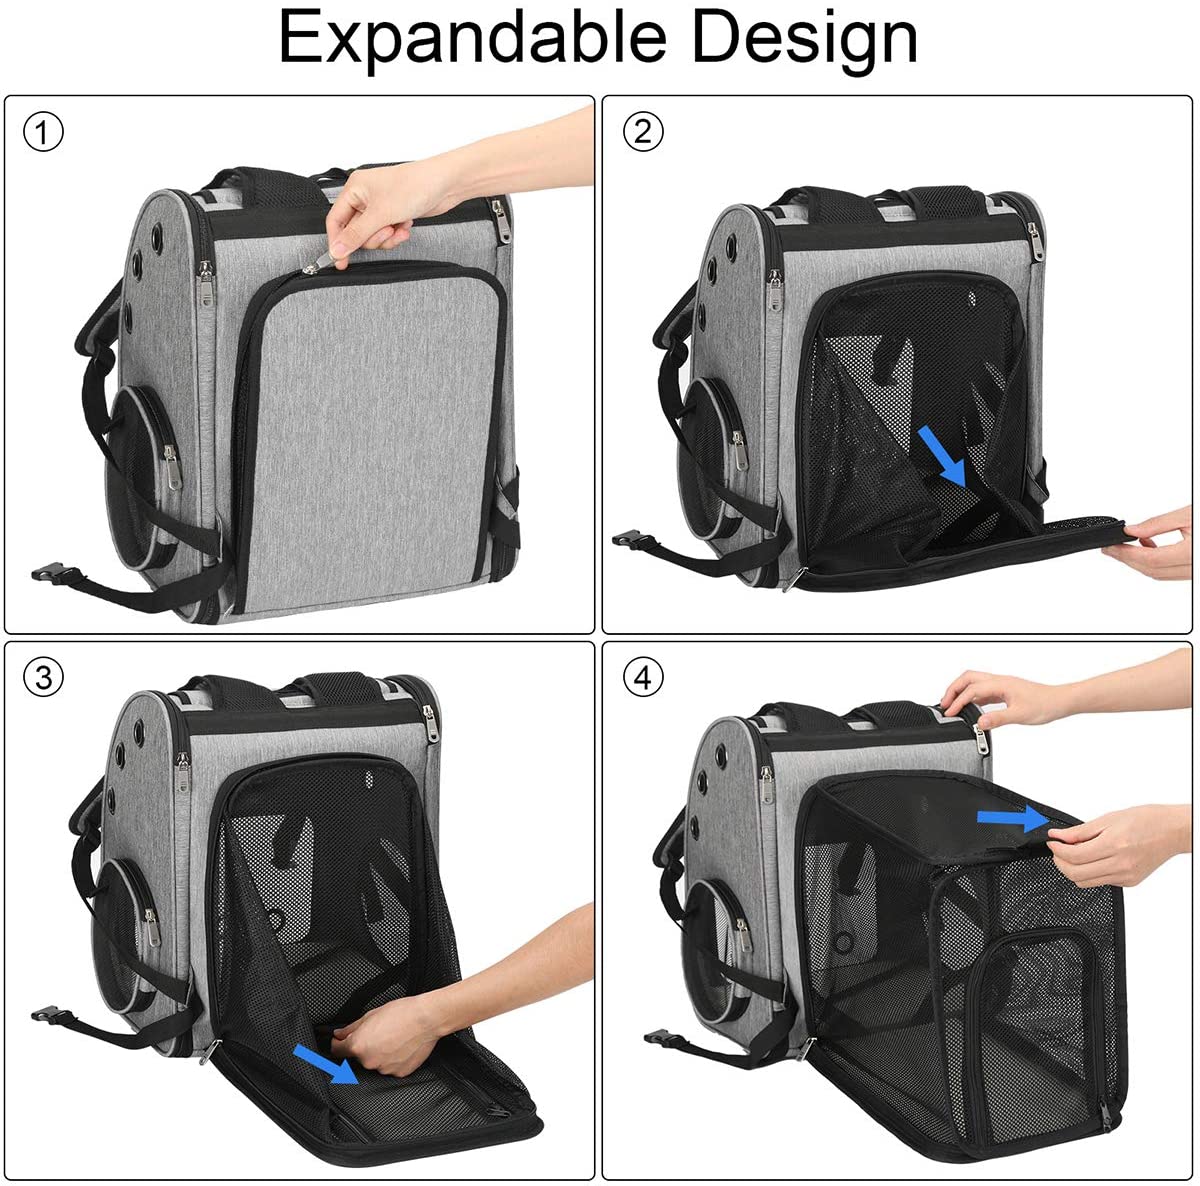 Expandable Pet Carrier Backpack for Cats, Dogs and Small Animals, Portable Pet Travel Carrier, Super Ventilated Design, Airline Approved, Ideal for Traveling/Hiking /Camping